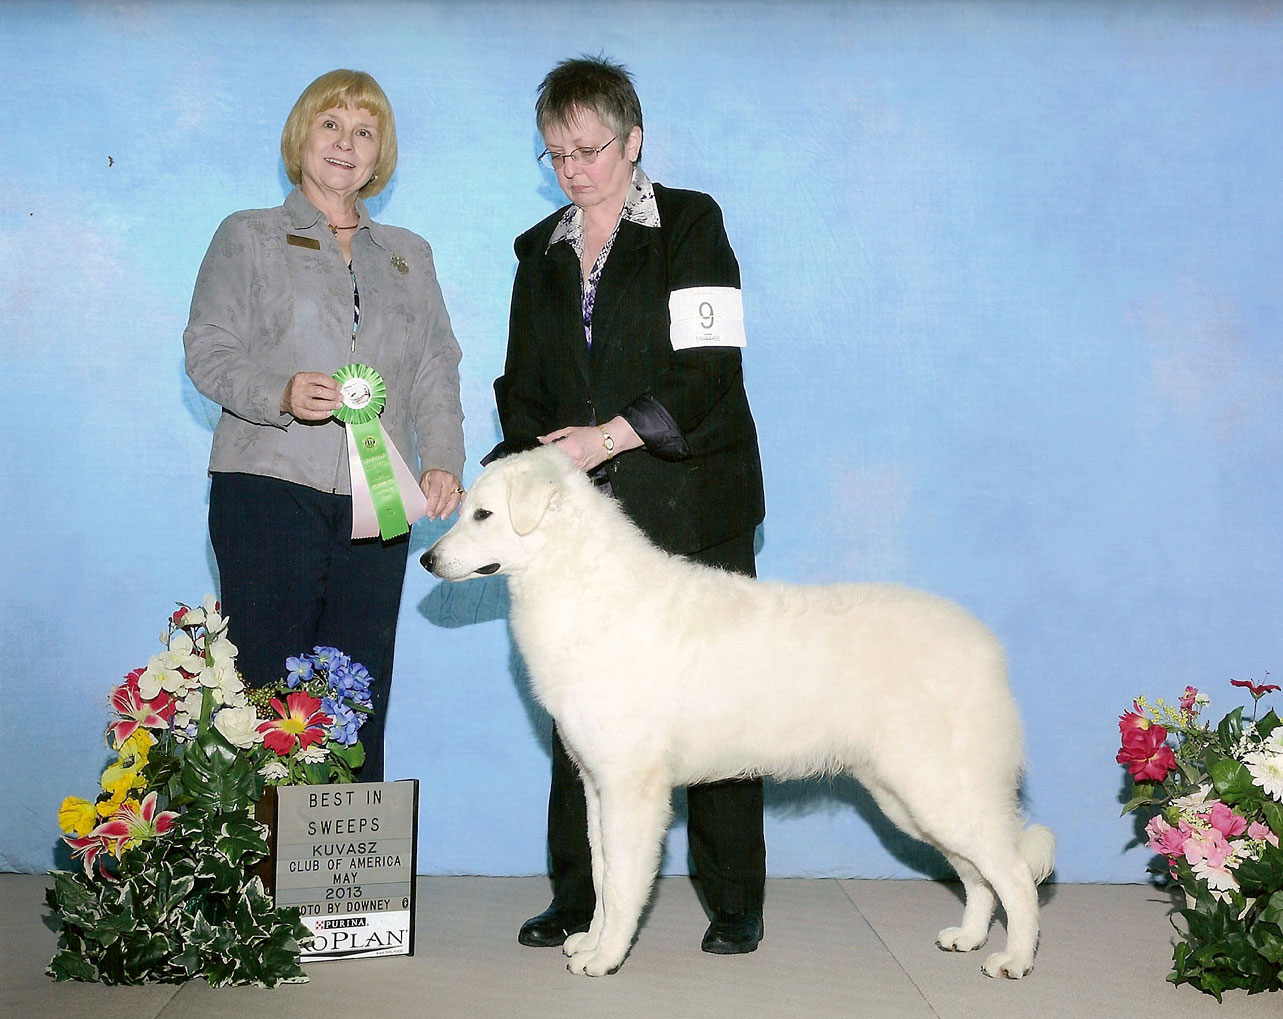 BEST IN SWEEPS.   Kuvasz Club of America Specialty Show, May 2013 (Photo by Downey